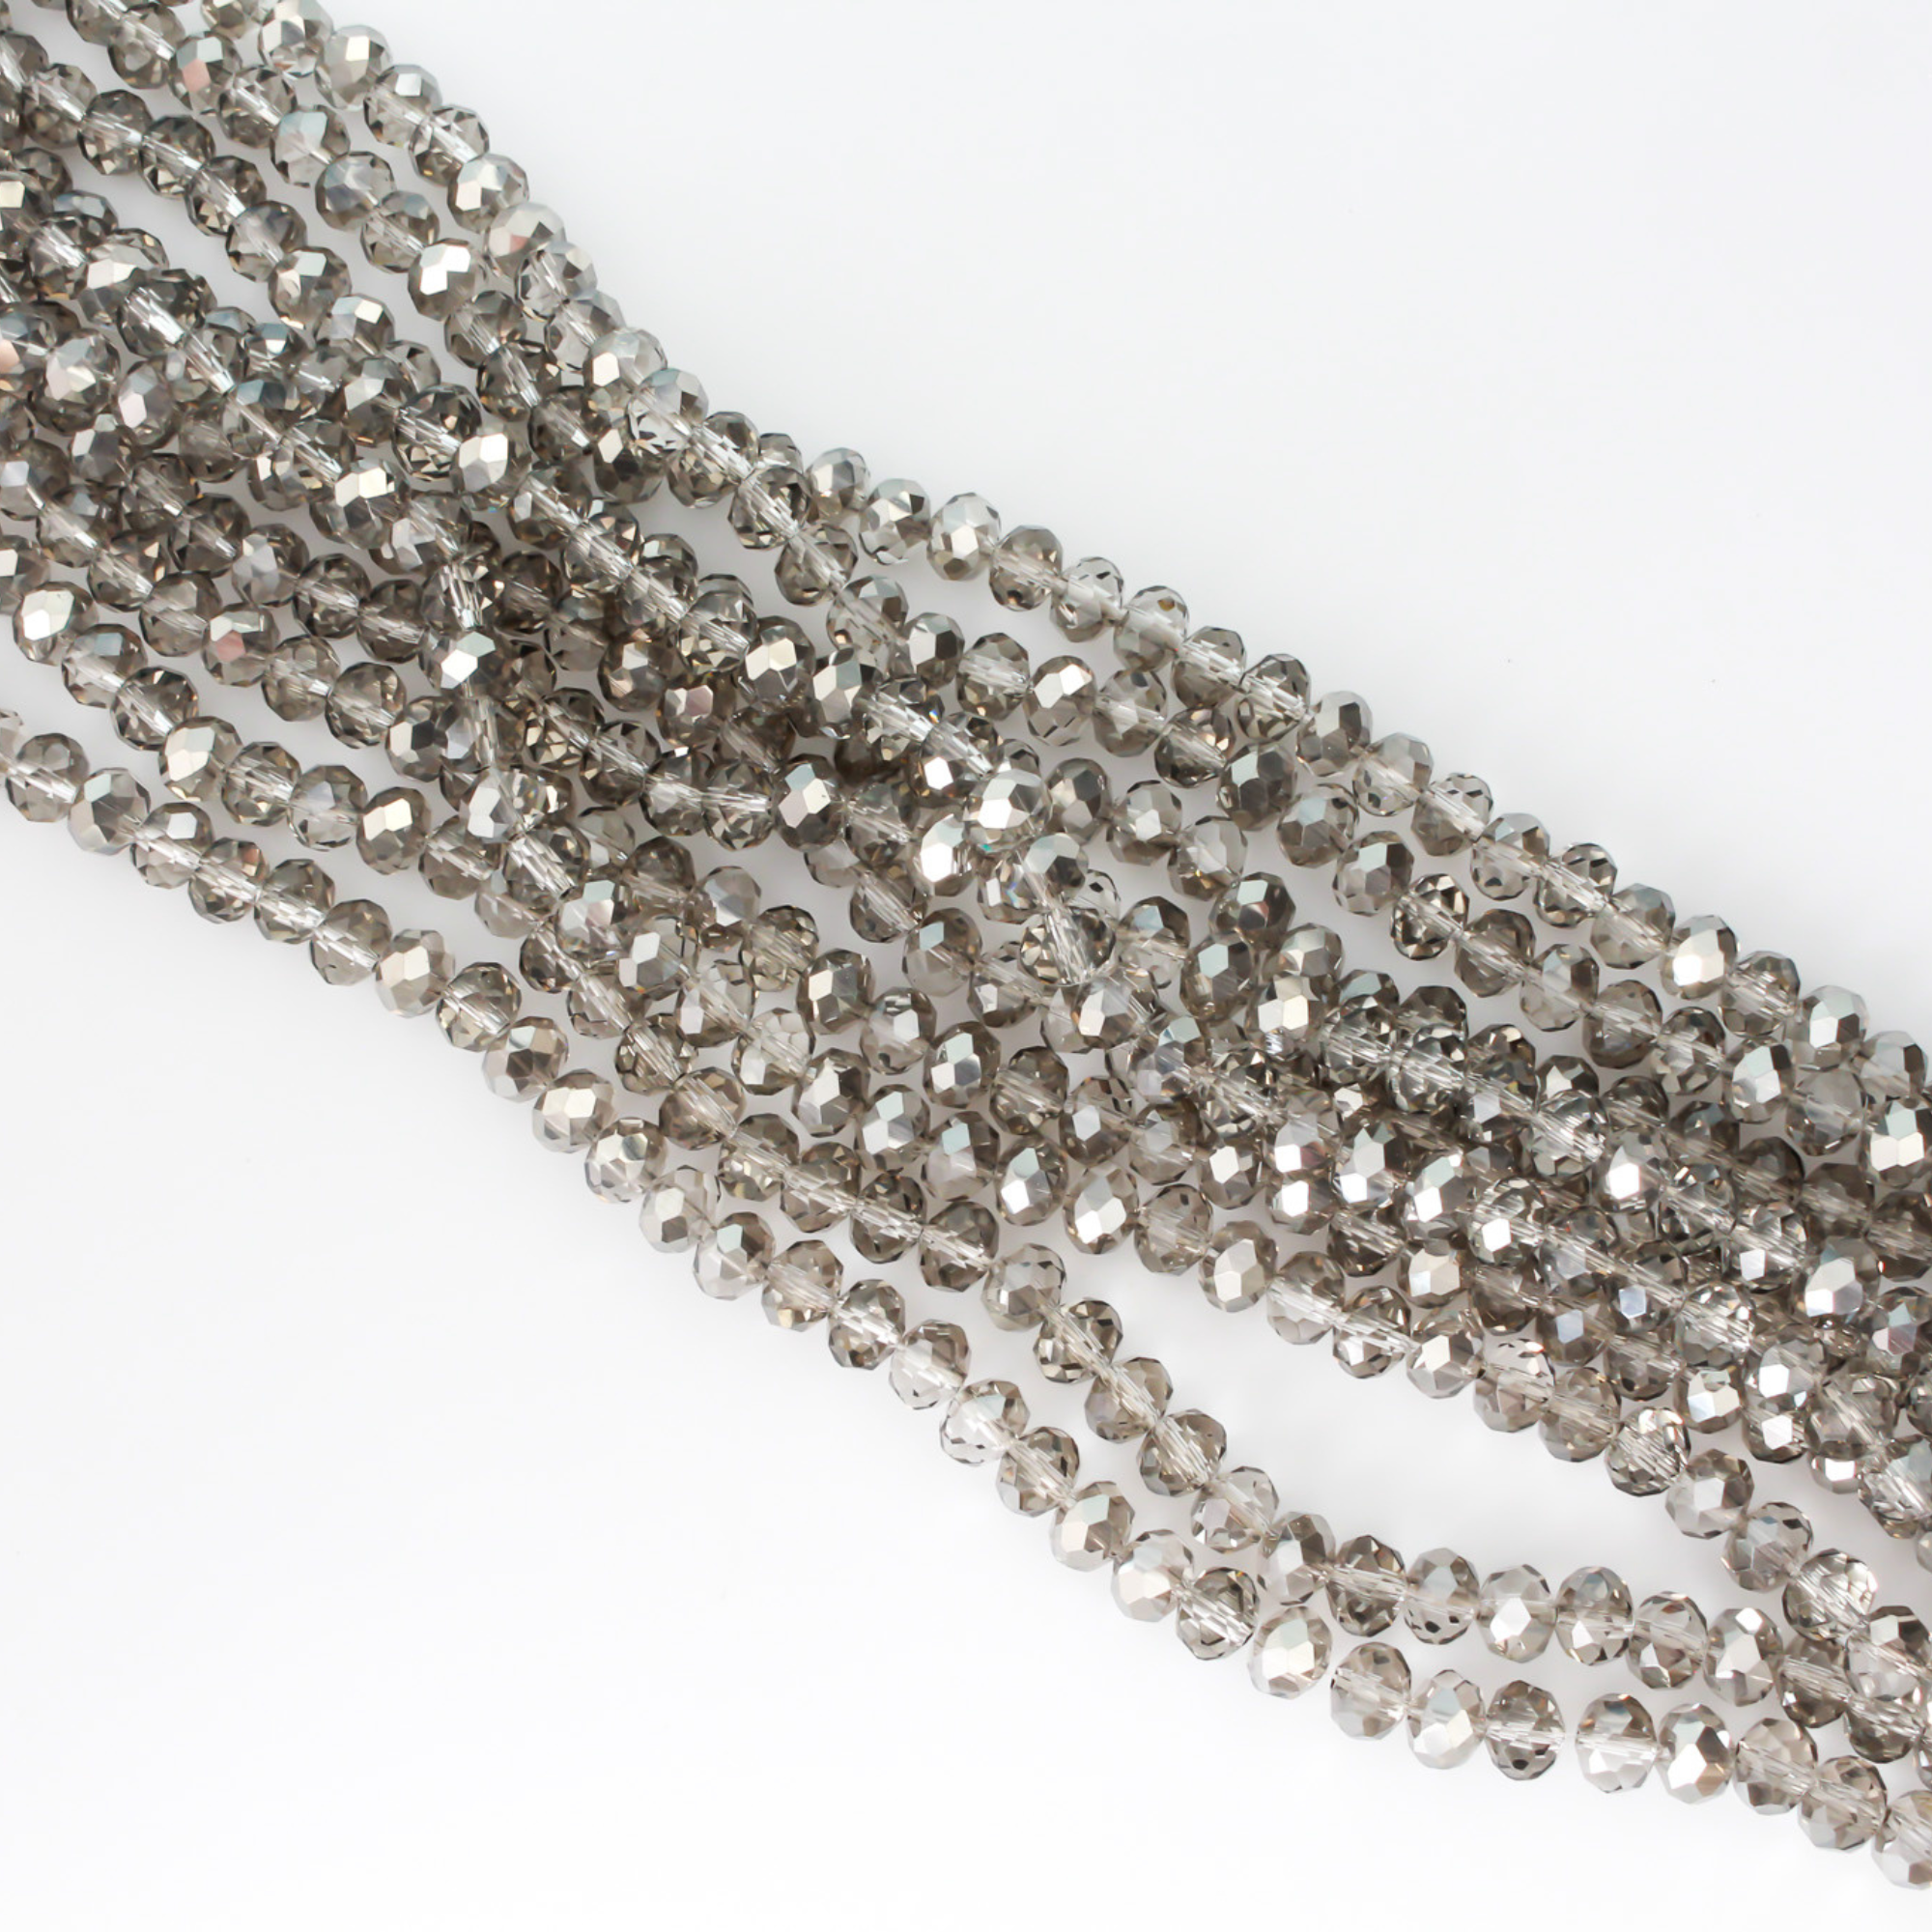 Light gray electroplate glass beads with a pearl luster plating. Rondelle in shape with a faceted design, 8x6mm